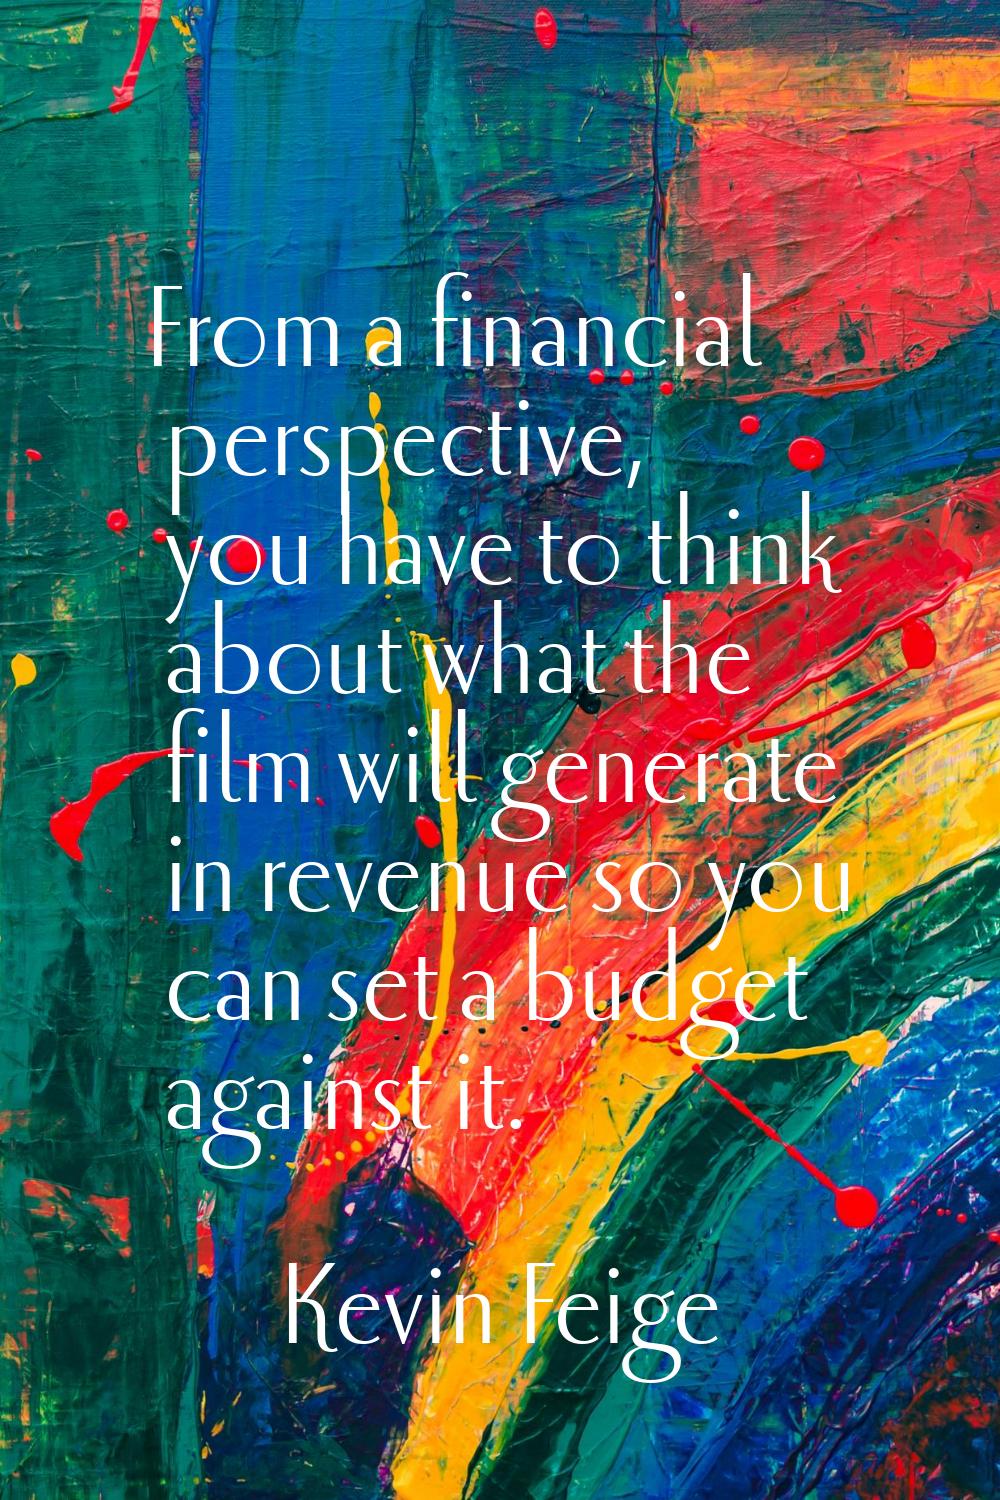 From a financial perspective, you have to think about what the film will generate in revenue so you